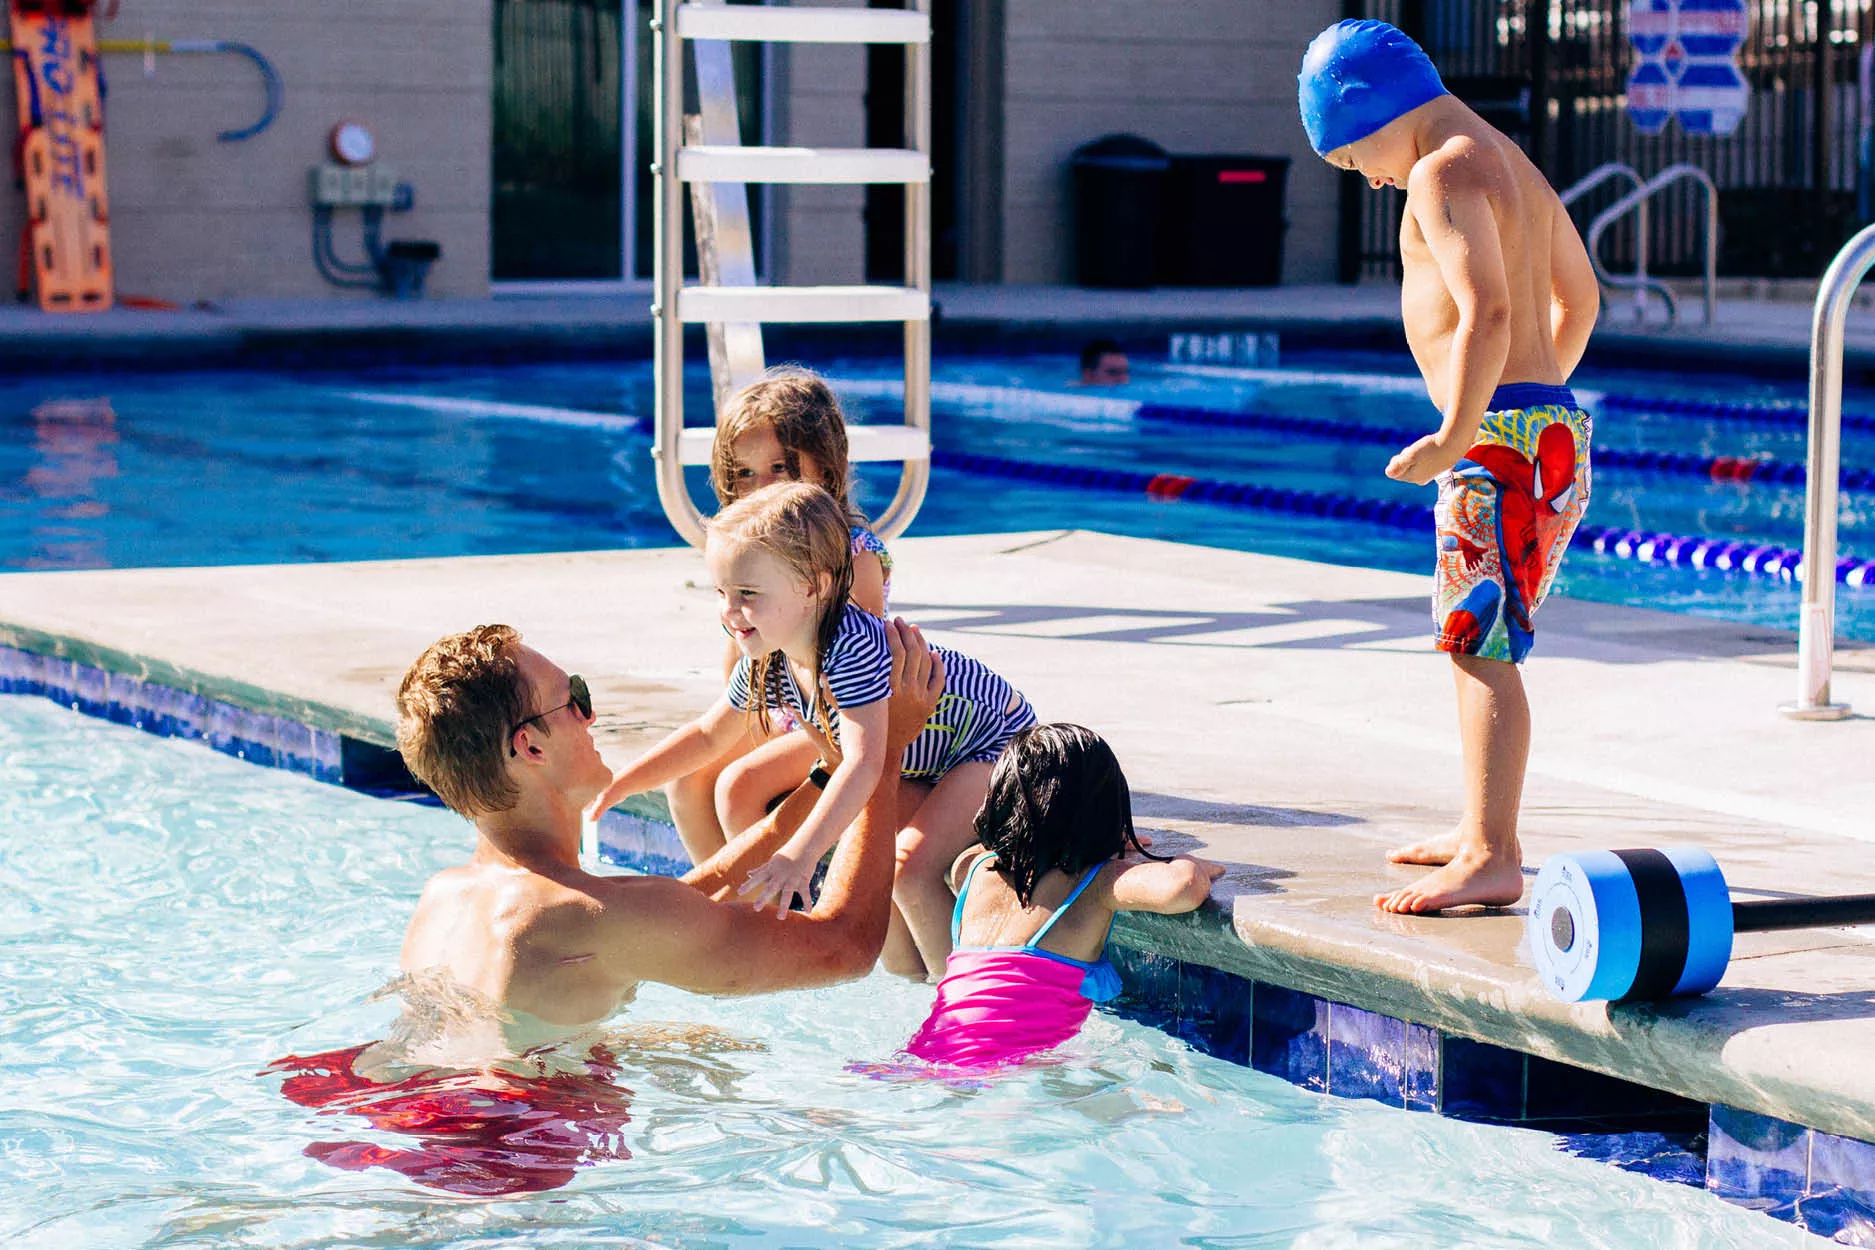 Lifeguard lifting female child into the pool while other children look on